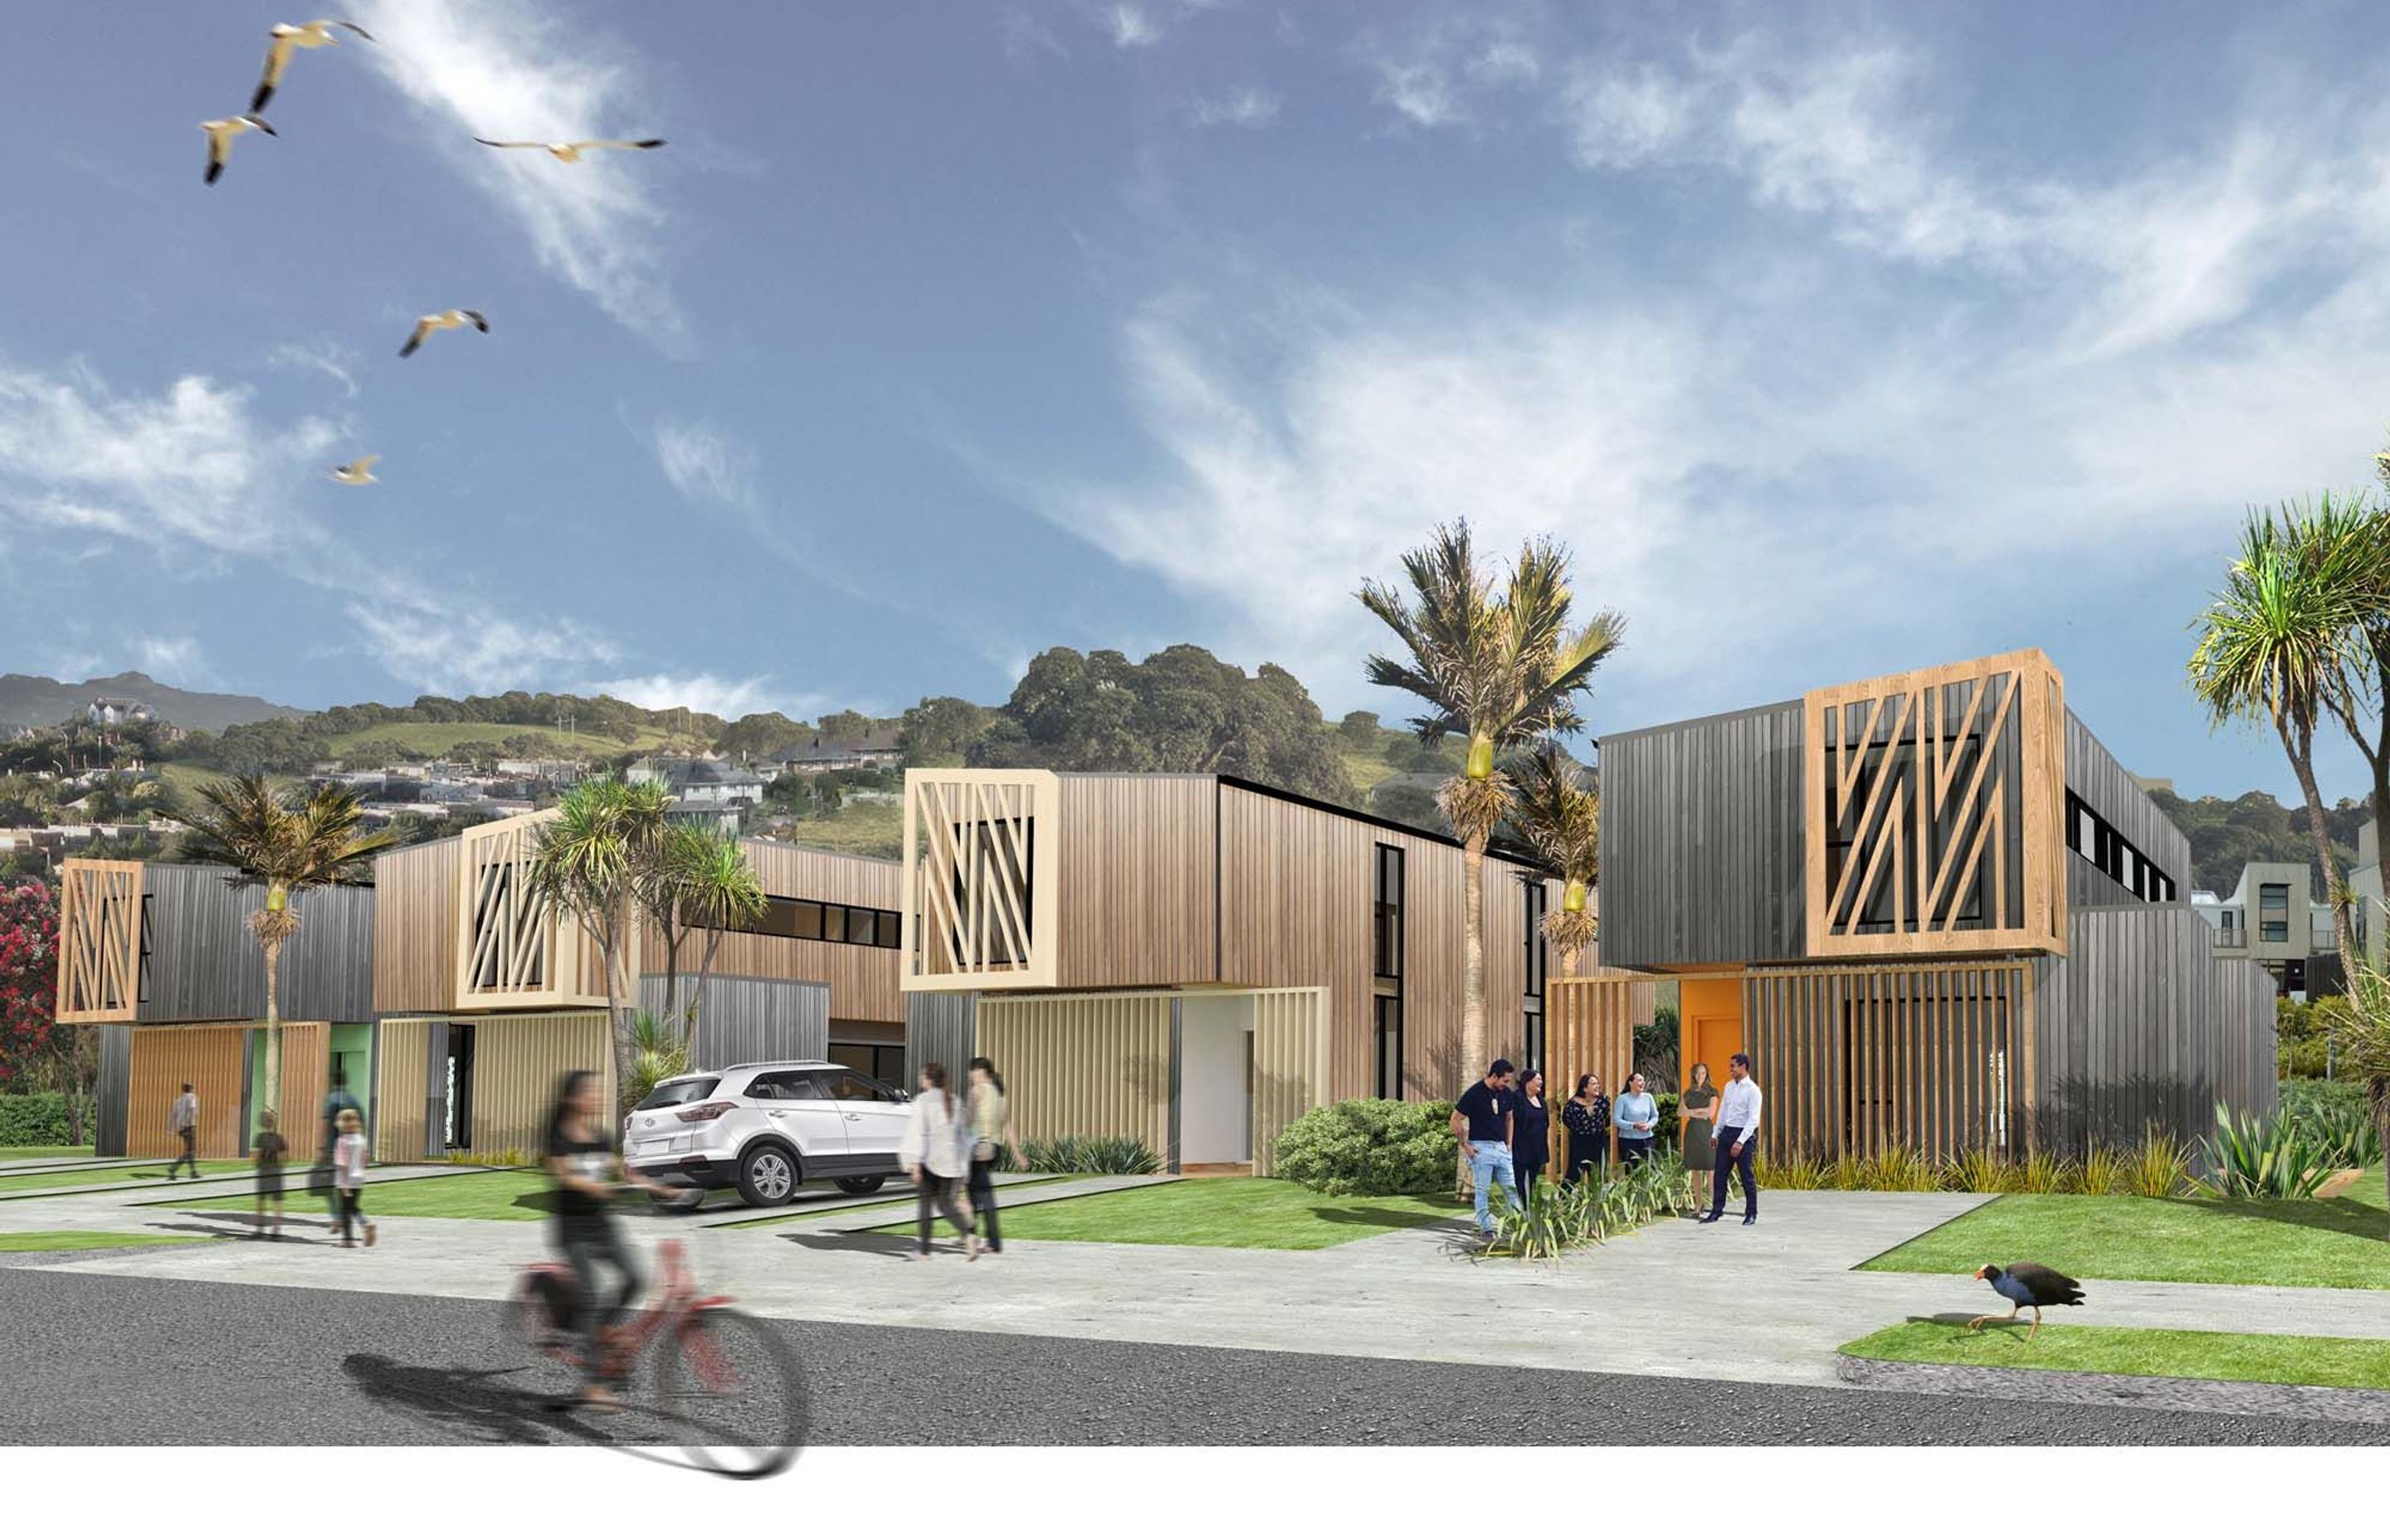 TOA's concept for MMH – Māori modular house, seen in the very top image (in a South Island location) and above, as terraced housing.